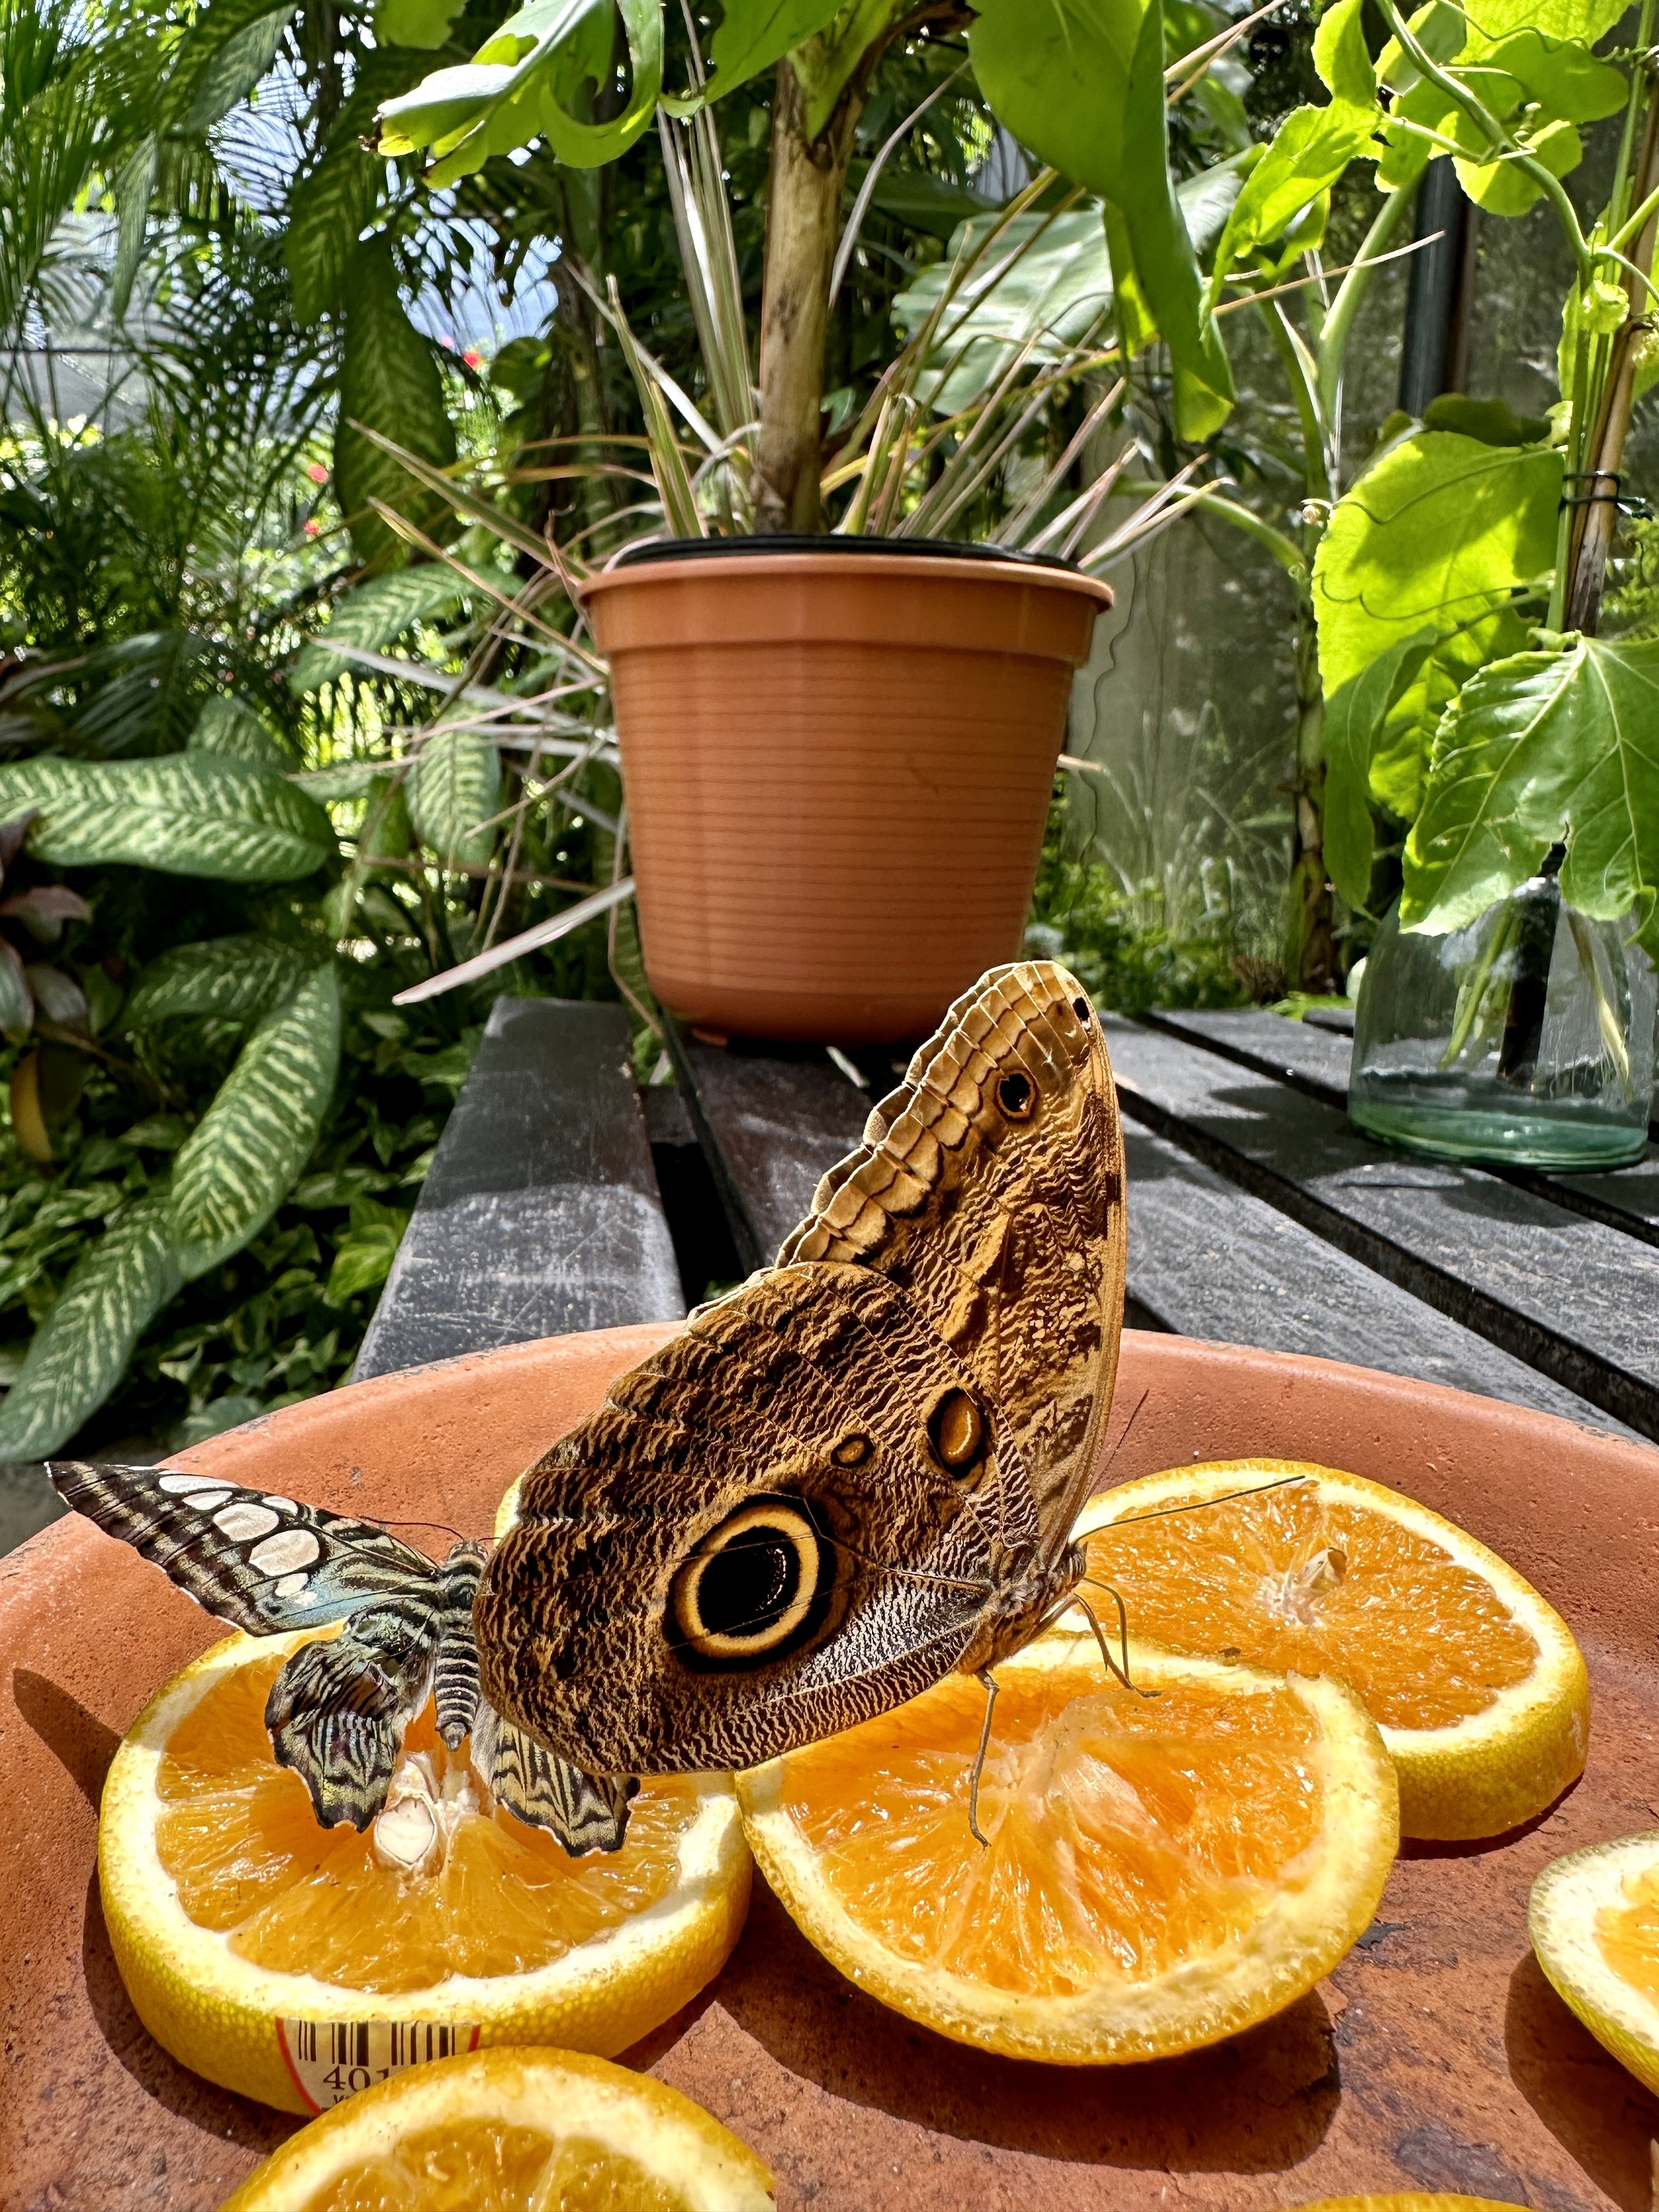 Two beautiful butterflies drinking from orange slices.